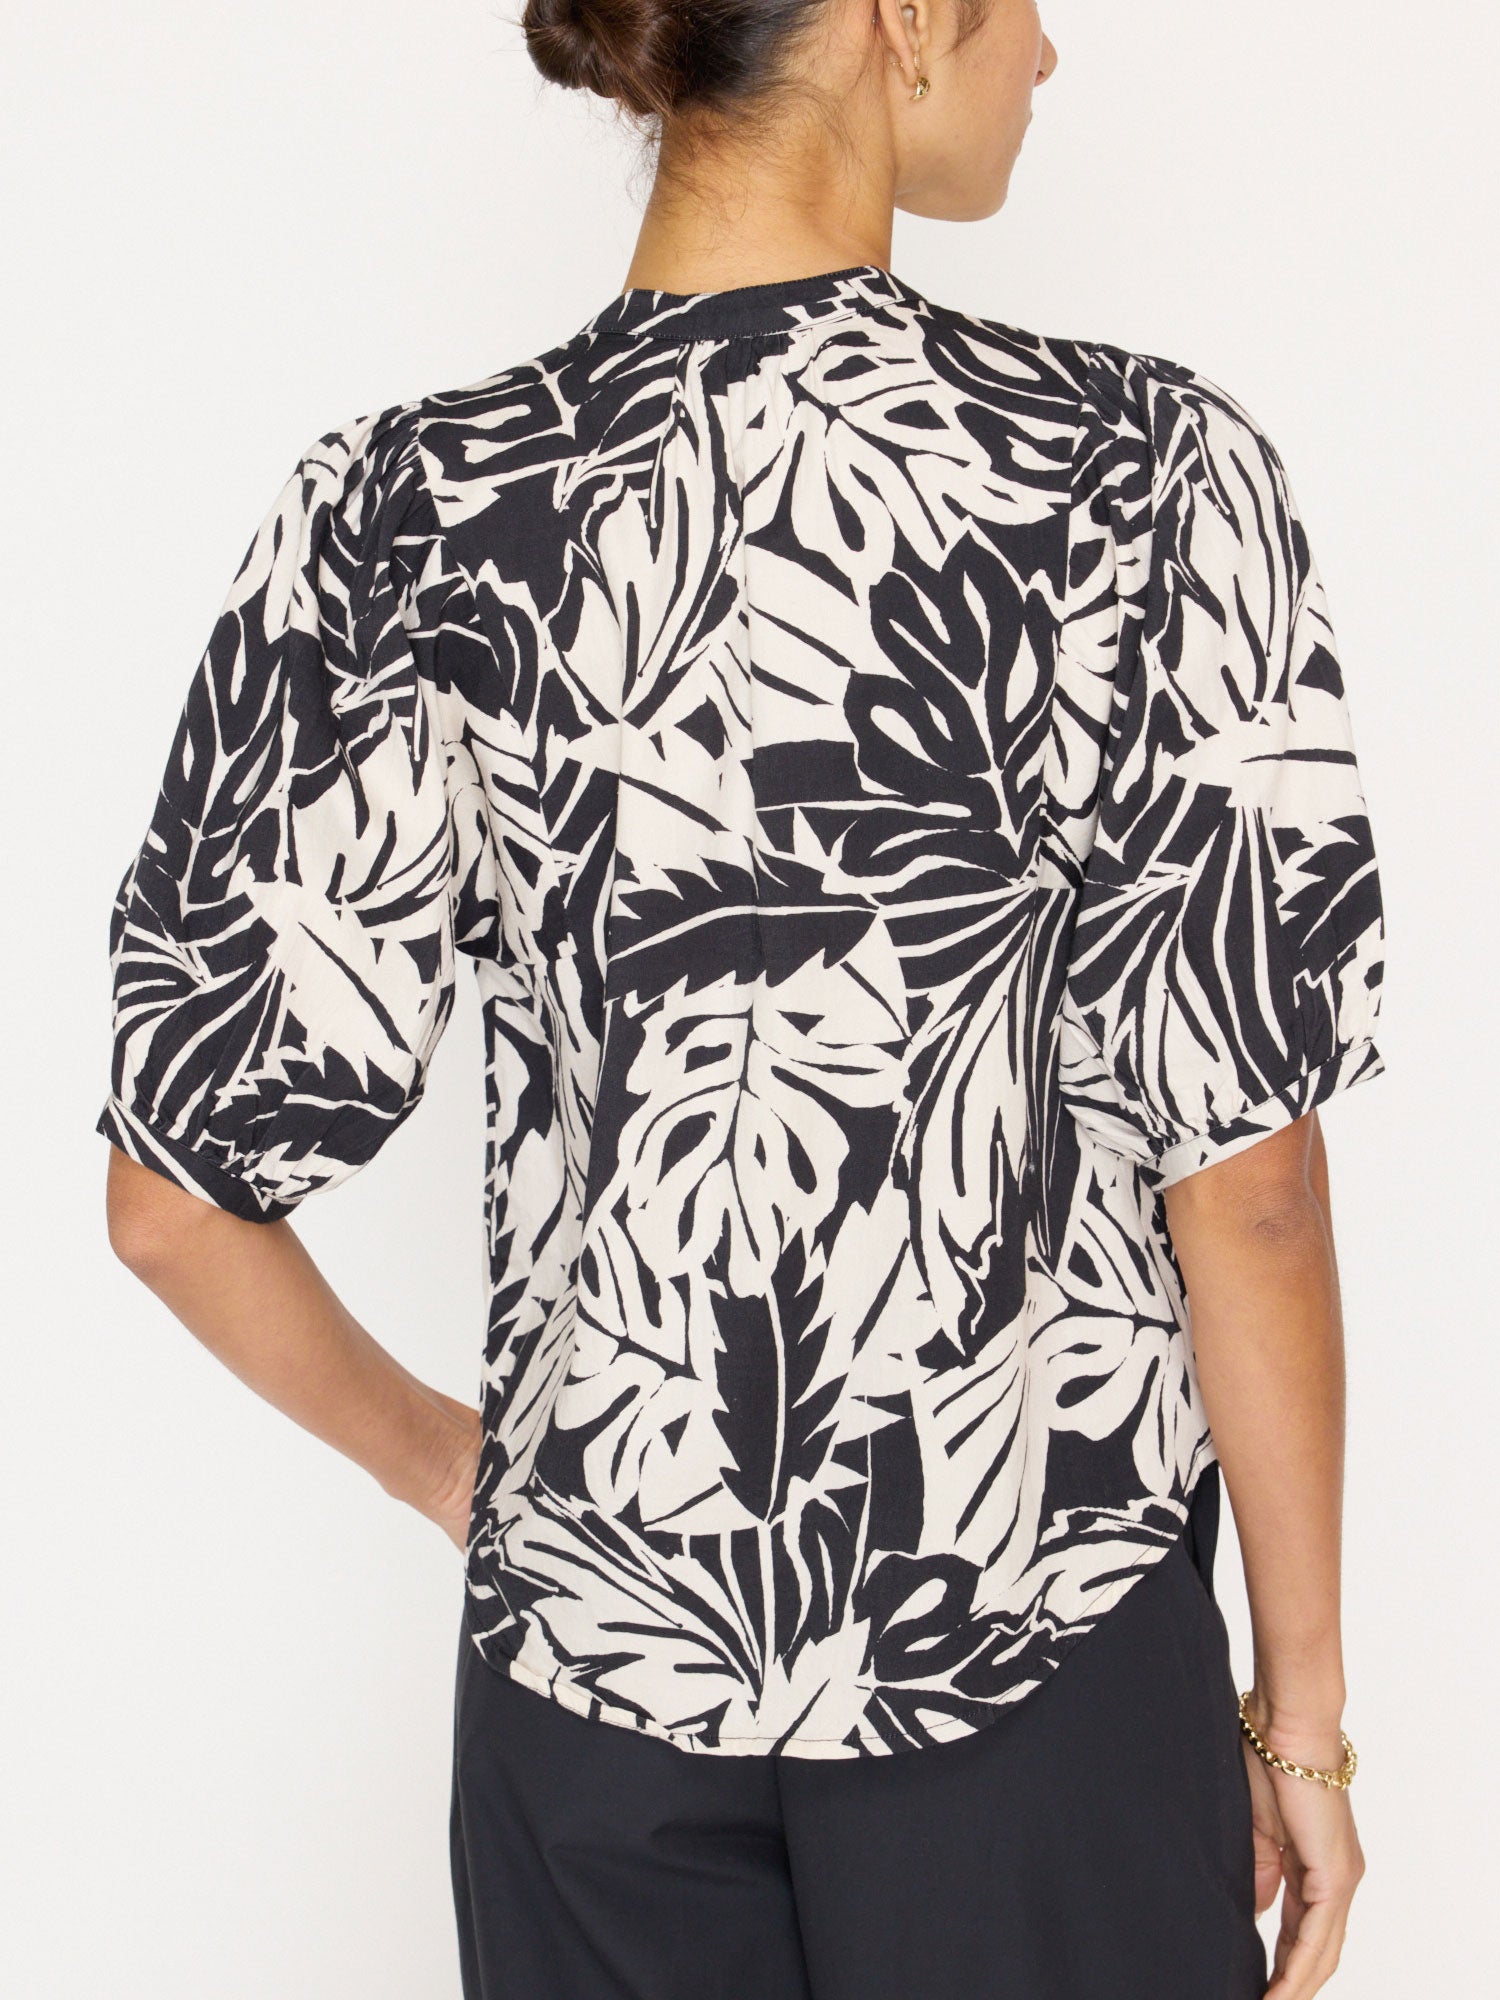 Asteria black and white printed blouse back view